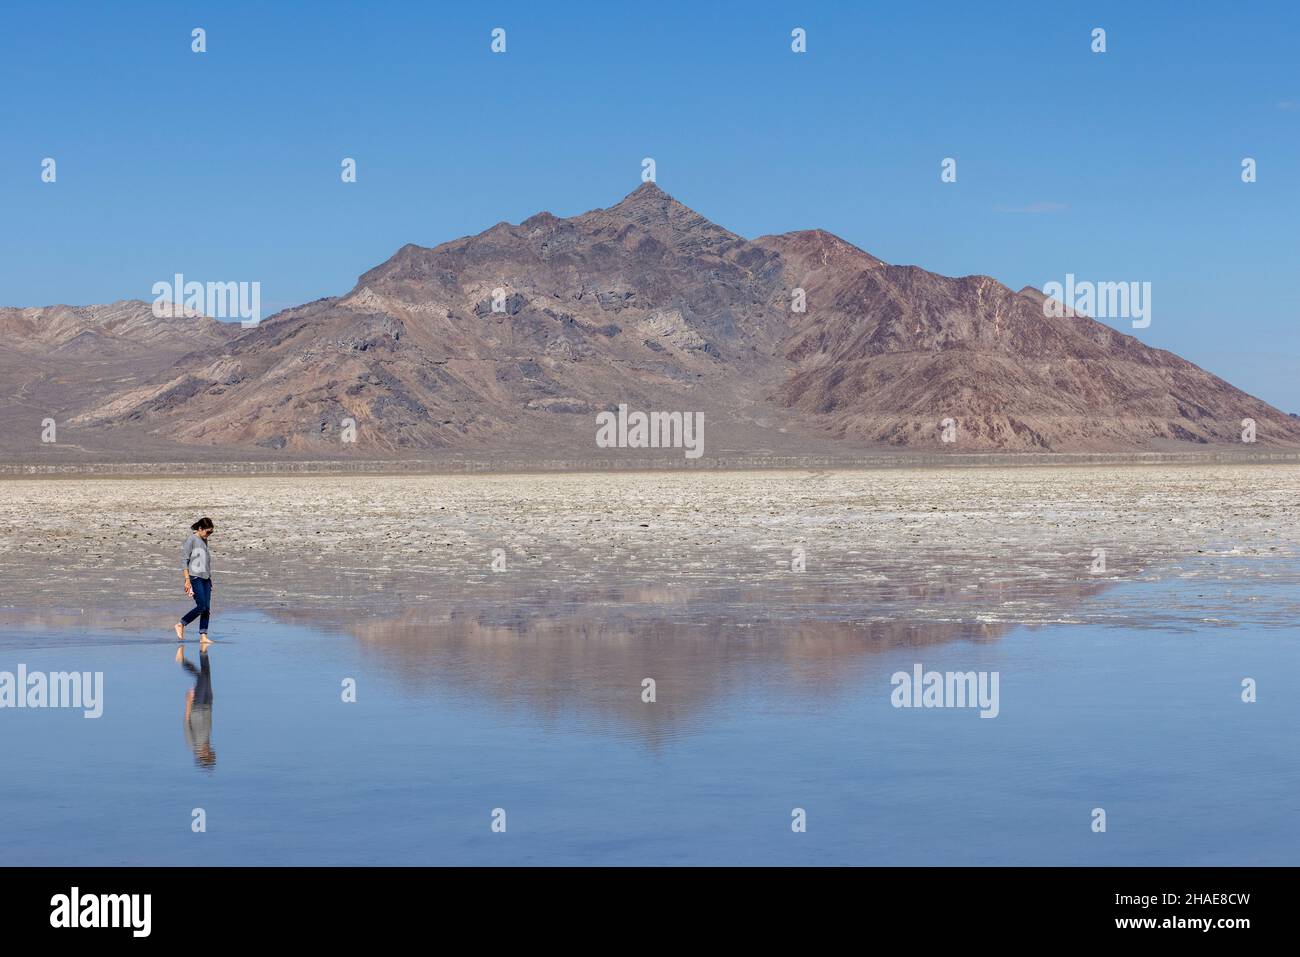 Bonneville Salt Flats are a densely packed salt pan in Tooele County in northwestern Utah. Stock Photo